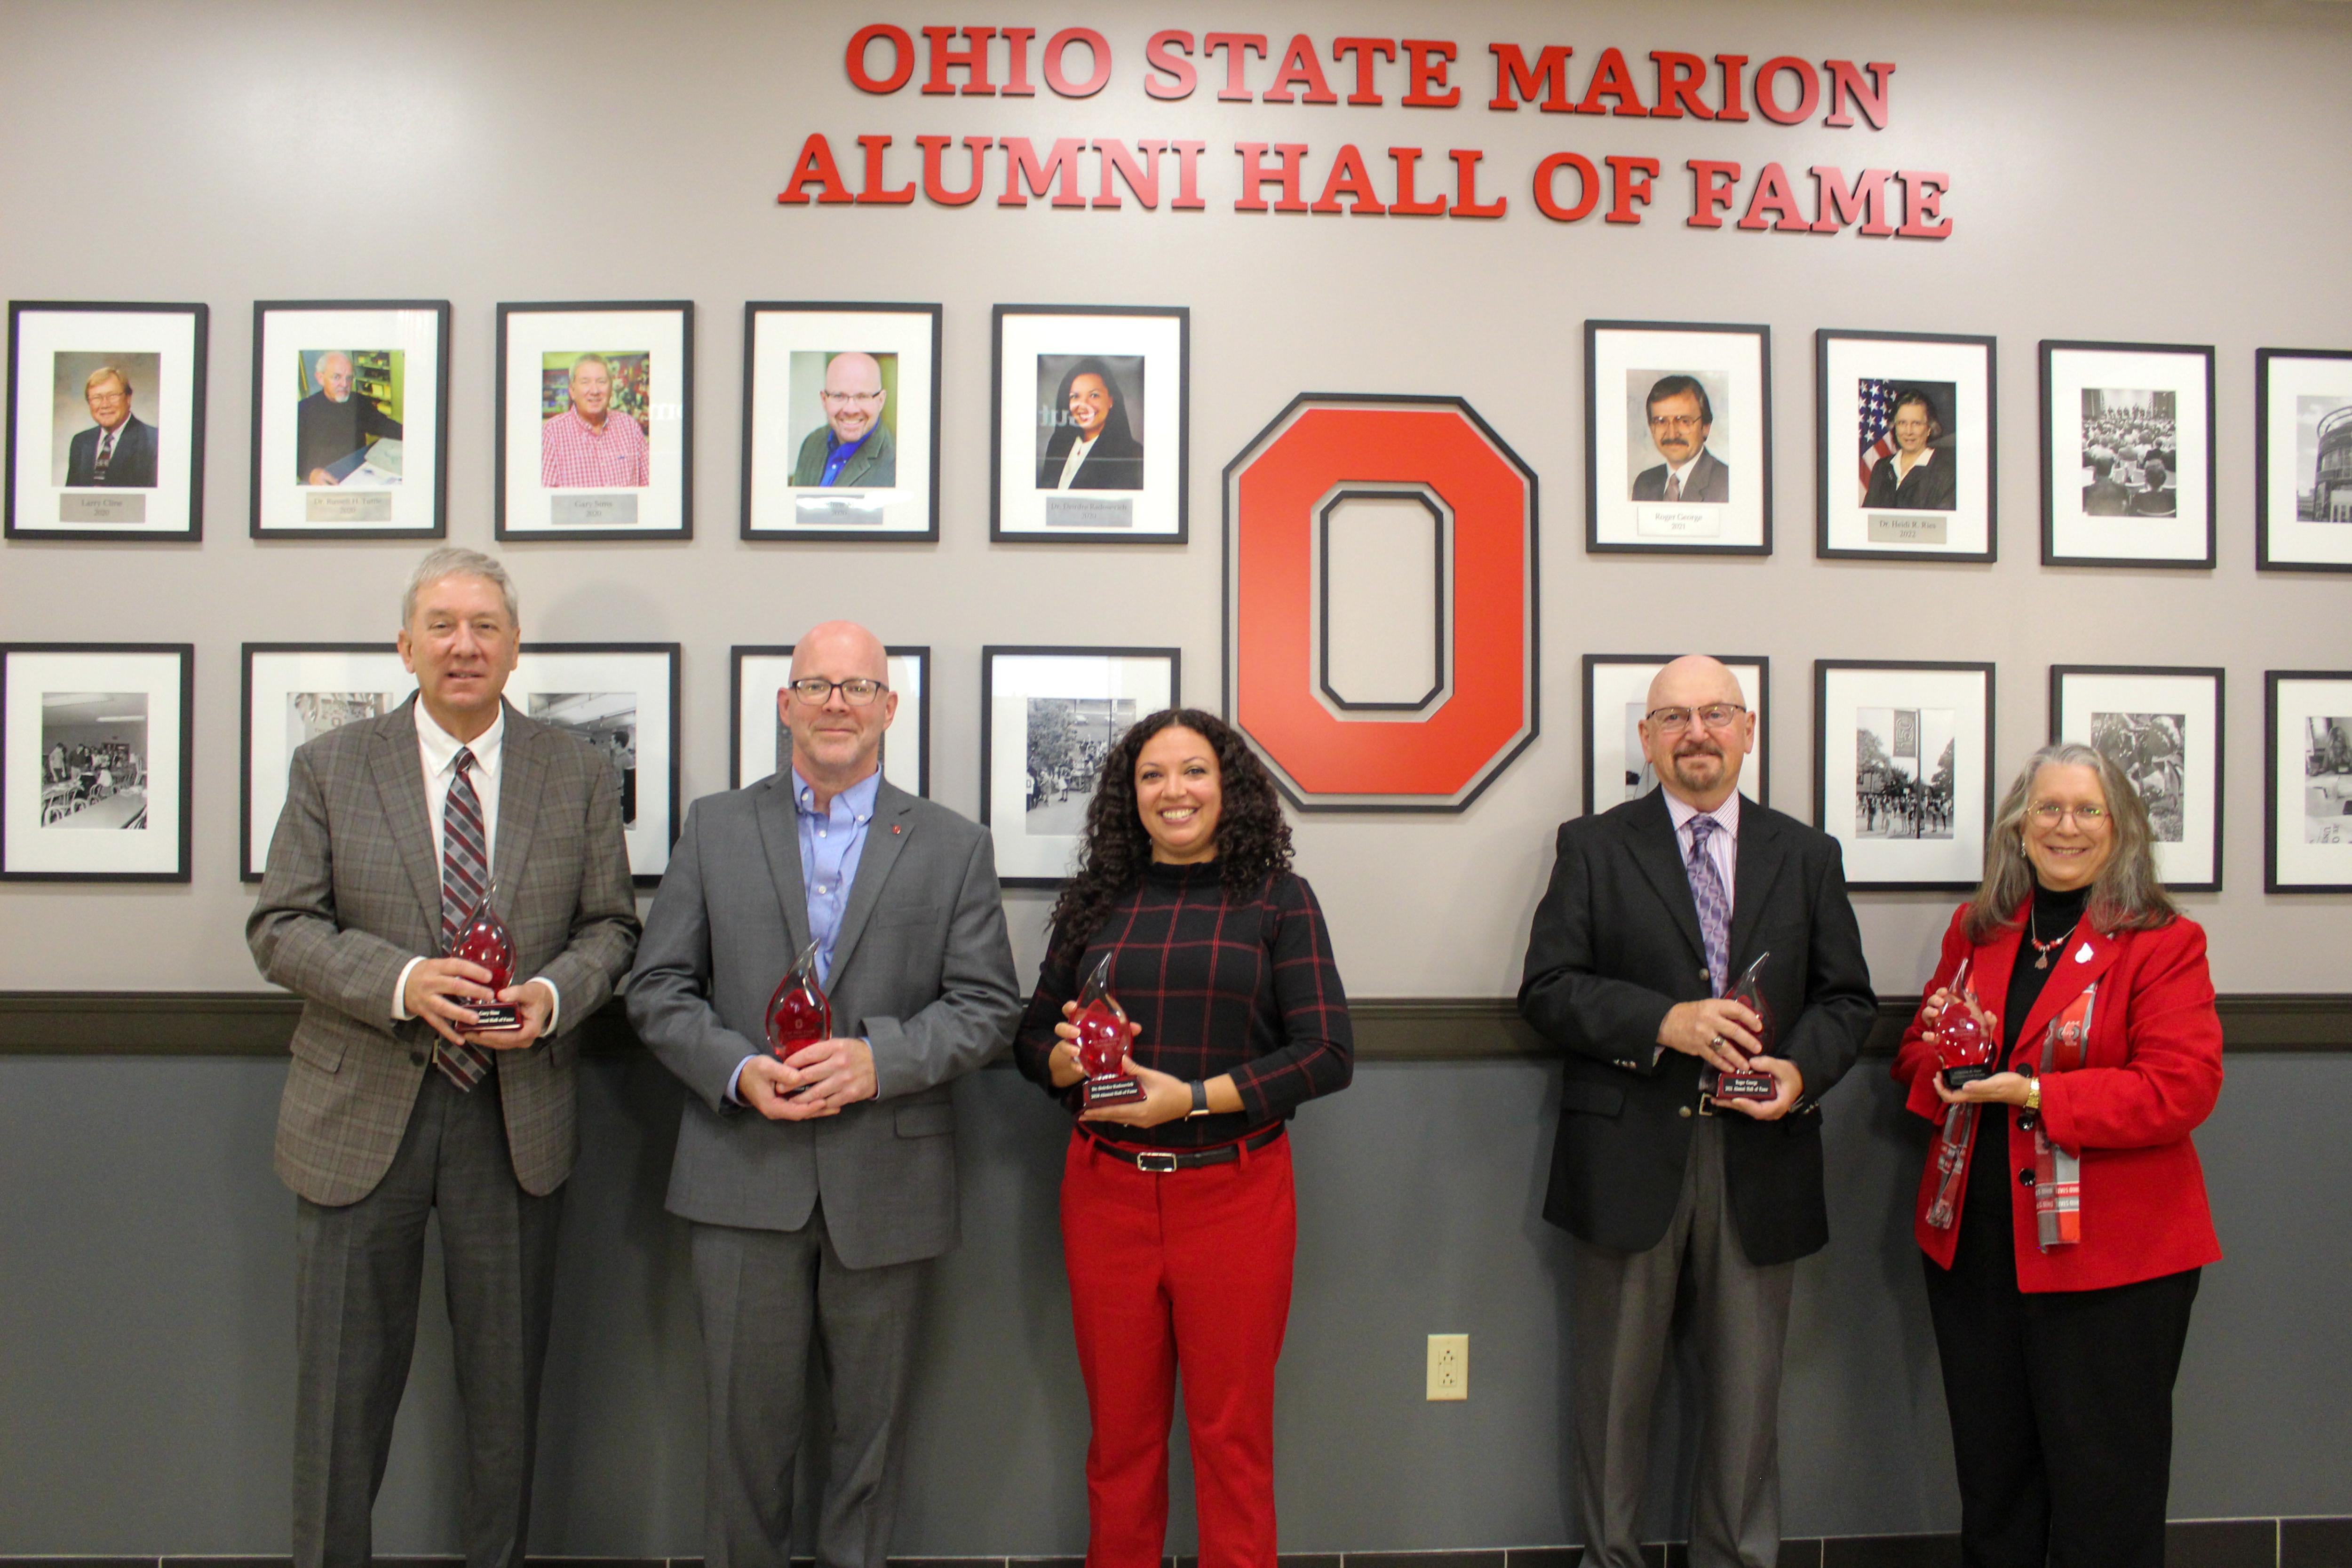 new members pictured in front of Ohio State Marion Alumni Hall of Fame wall